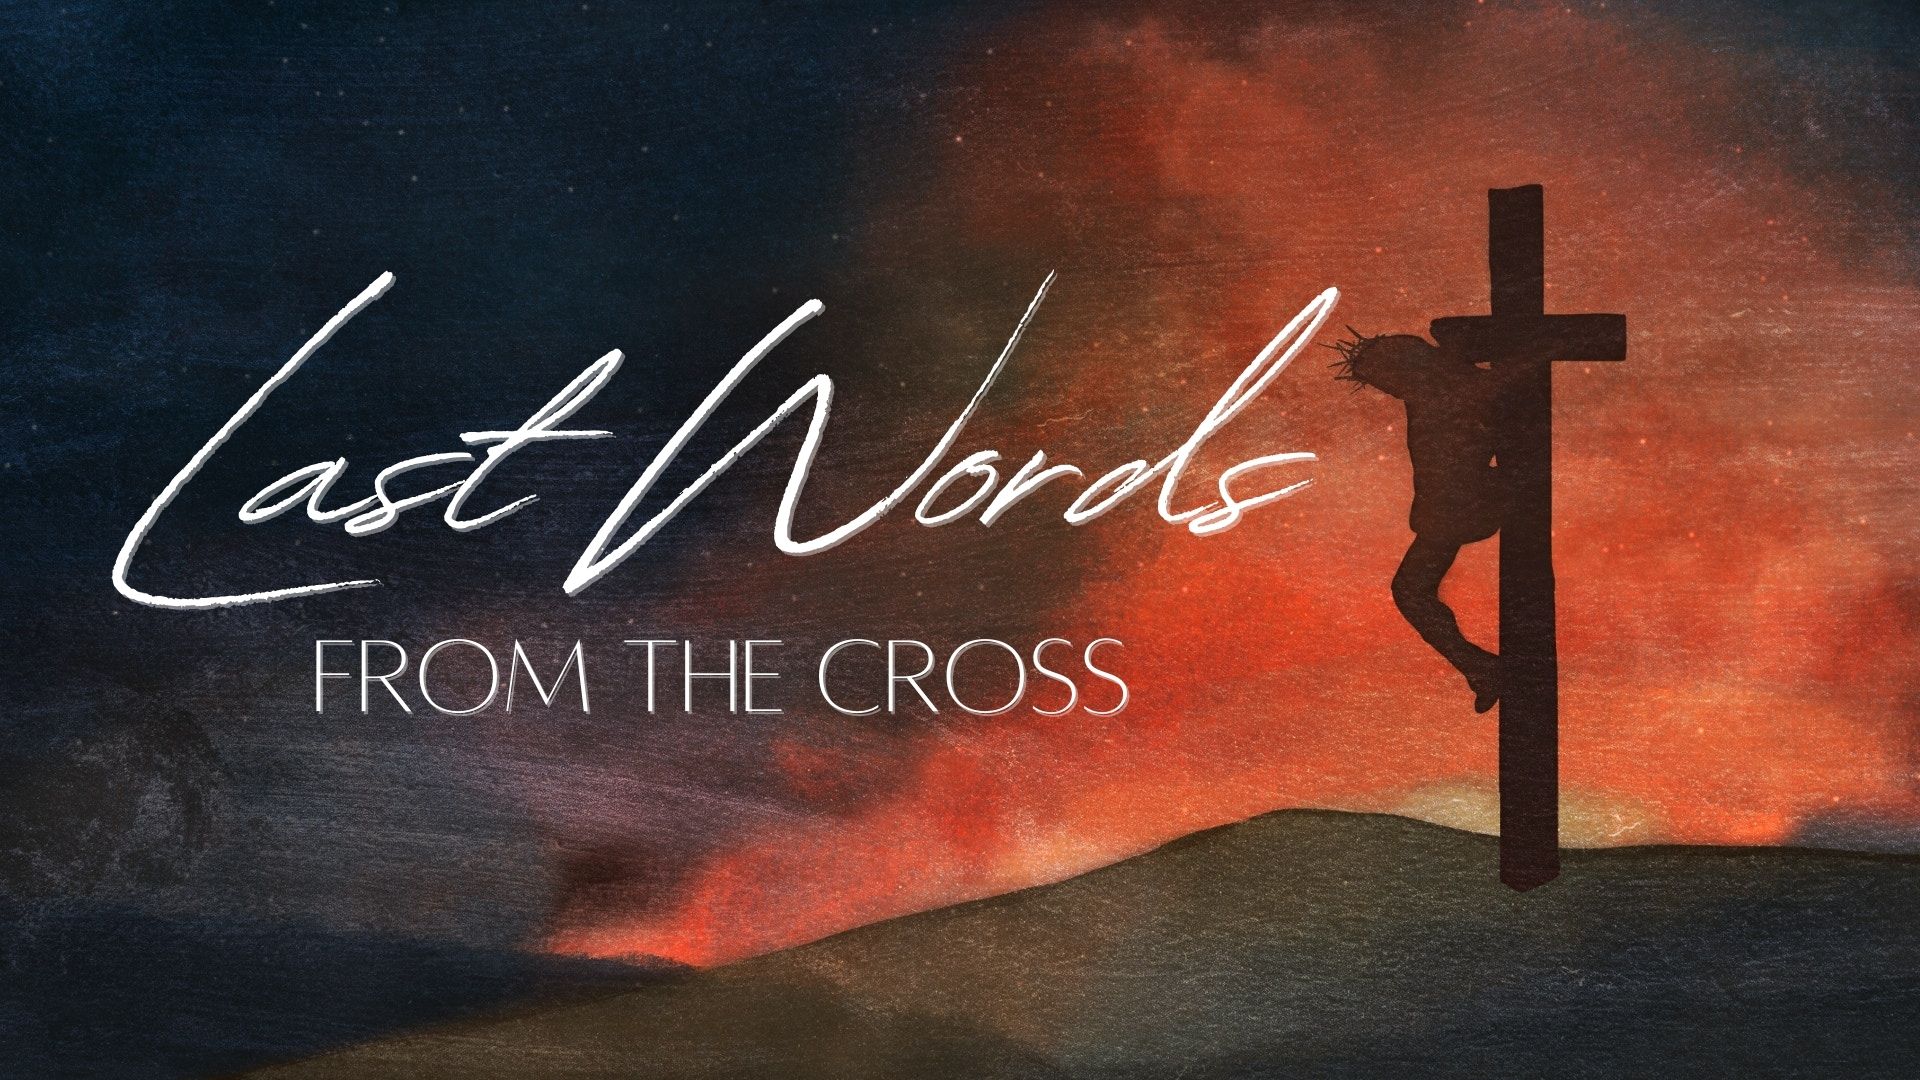 The Humanity and Finality of the Cross